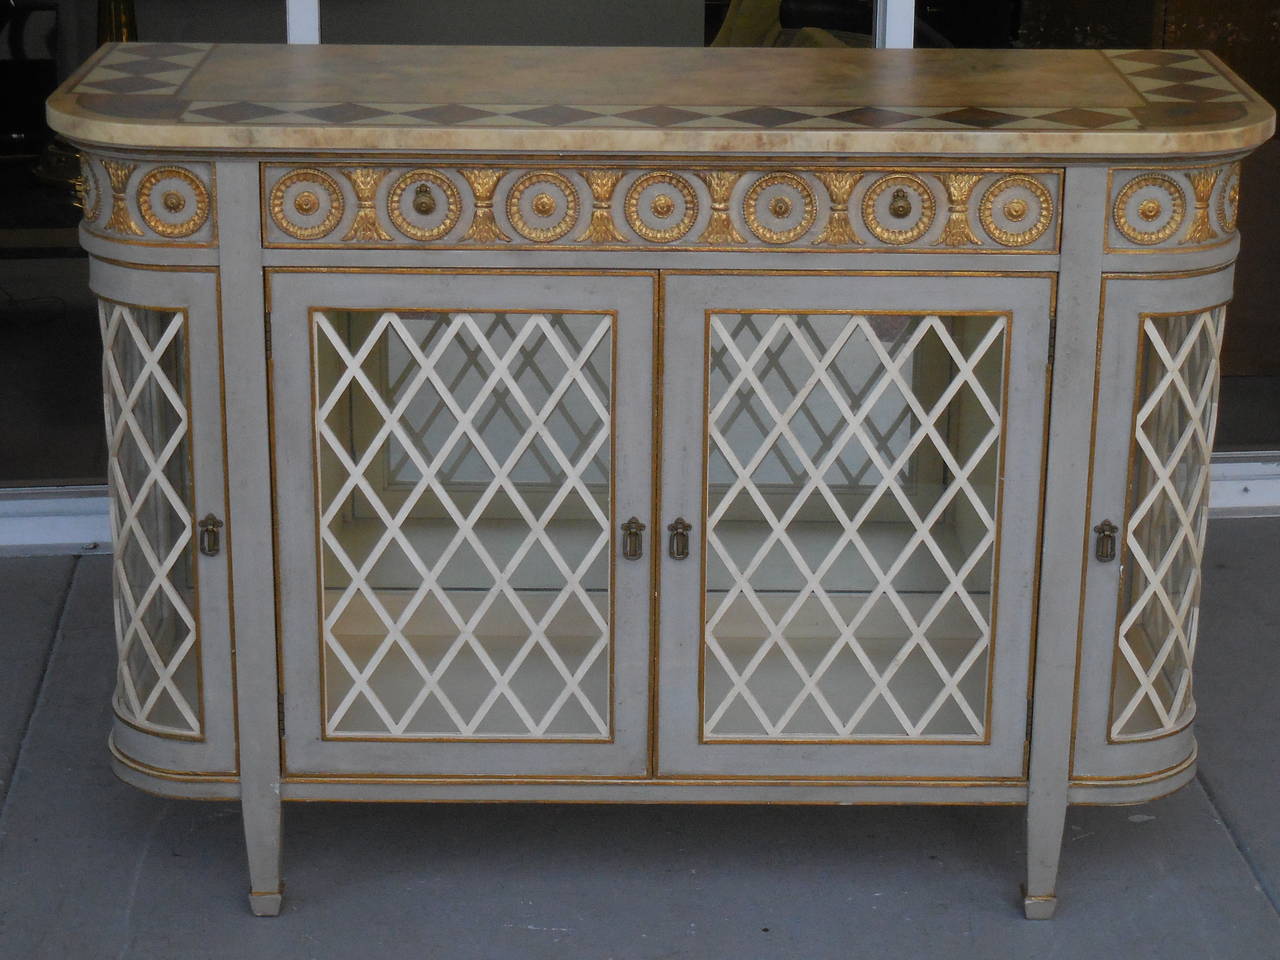 Exquisite cabinet or console. Gilt detail and faux marble-top. There is a glass shelf behind the central doors and also on the corners. Interior is mirrored and lit.